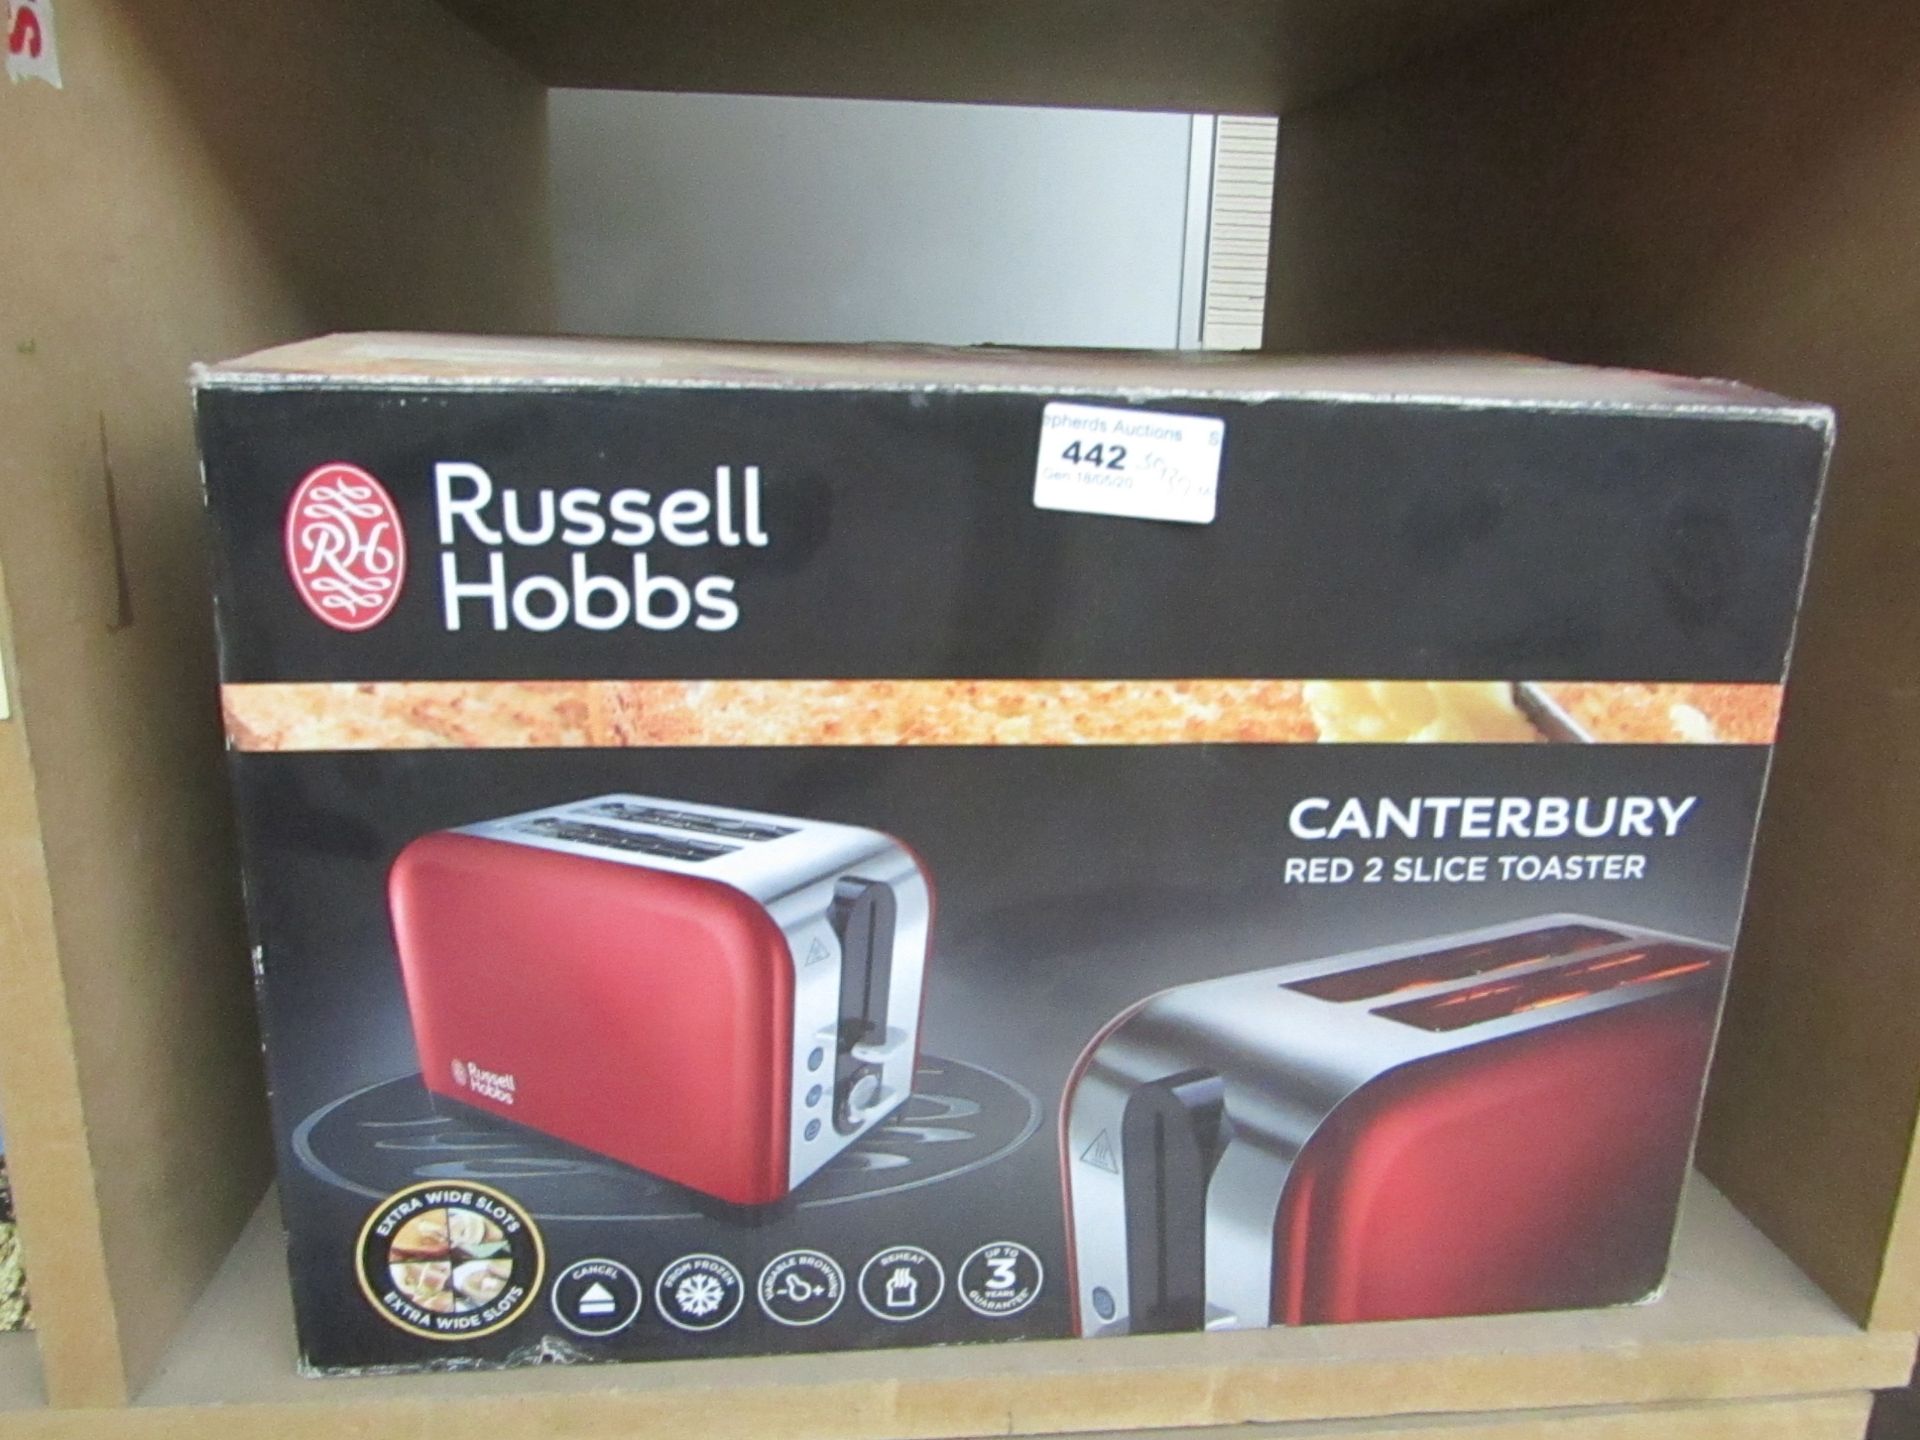 Russel Hobbs Canterbury Red 2 Slice Toaster. Boxed & Vendor Suggests it Works.